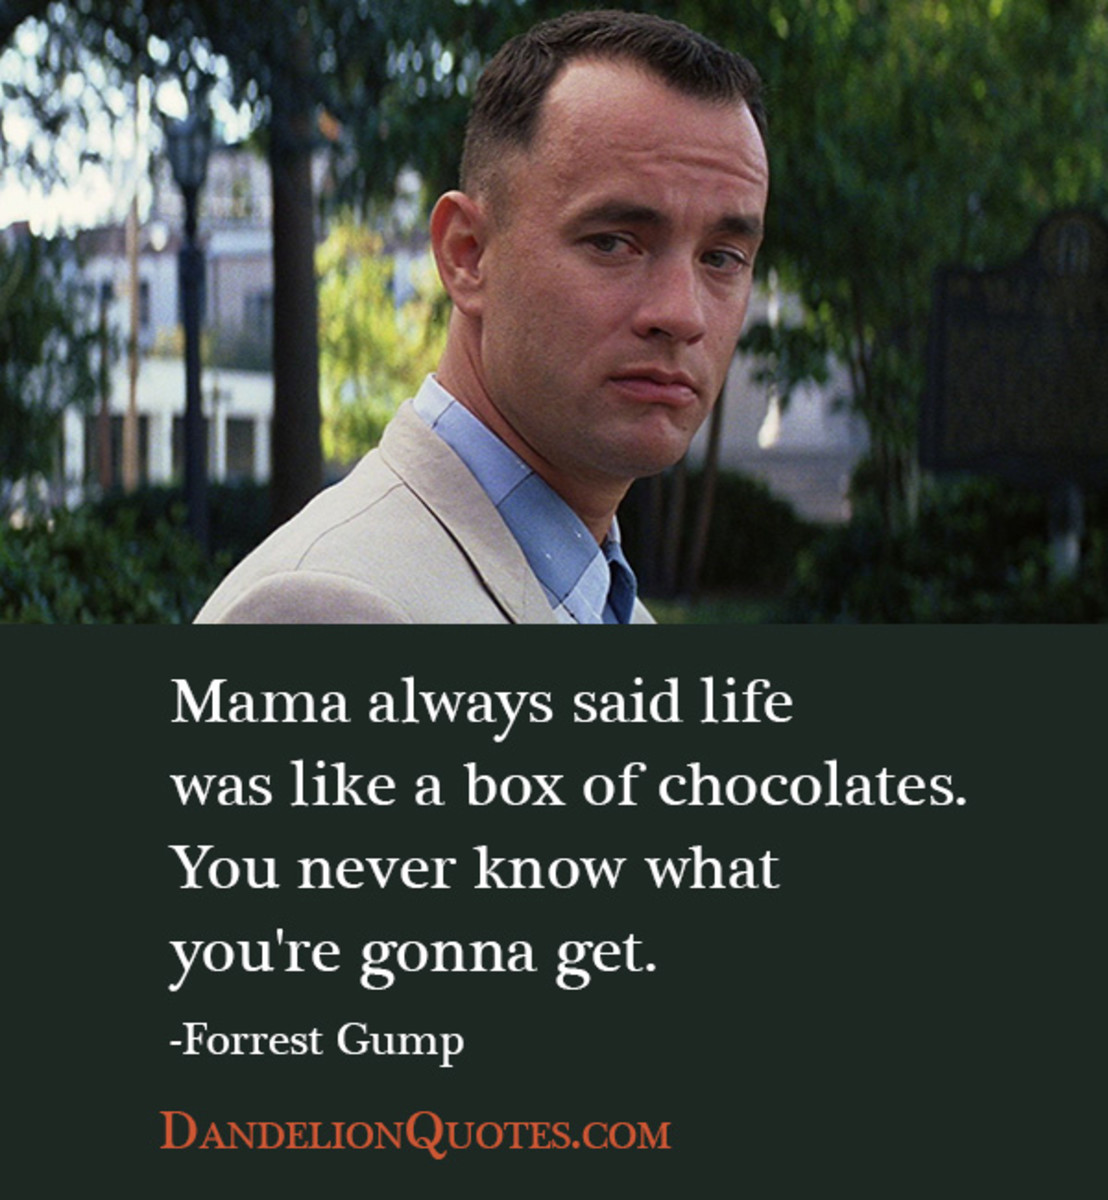 Quote from Forrest Gump